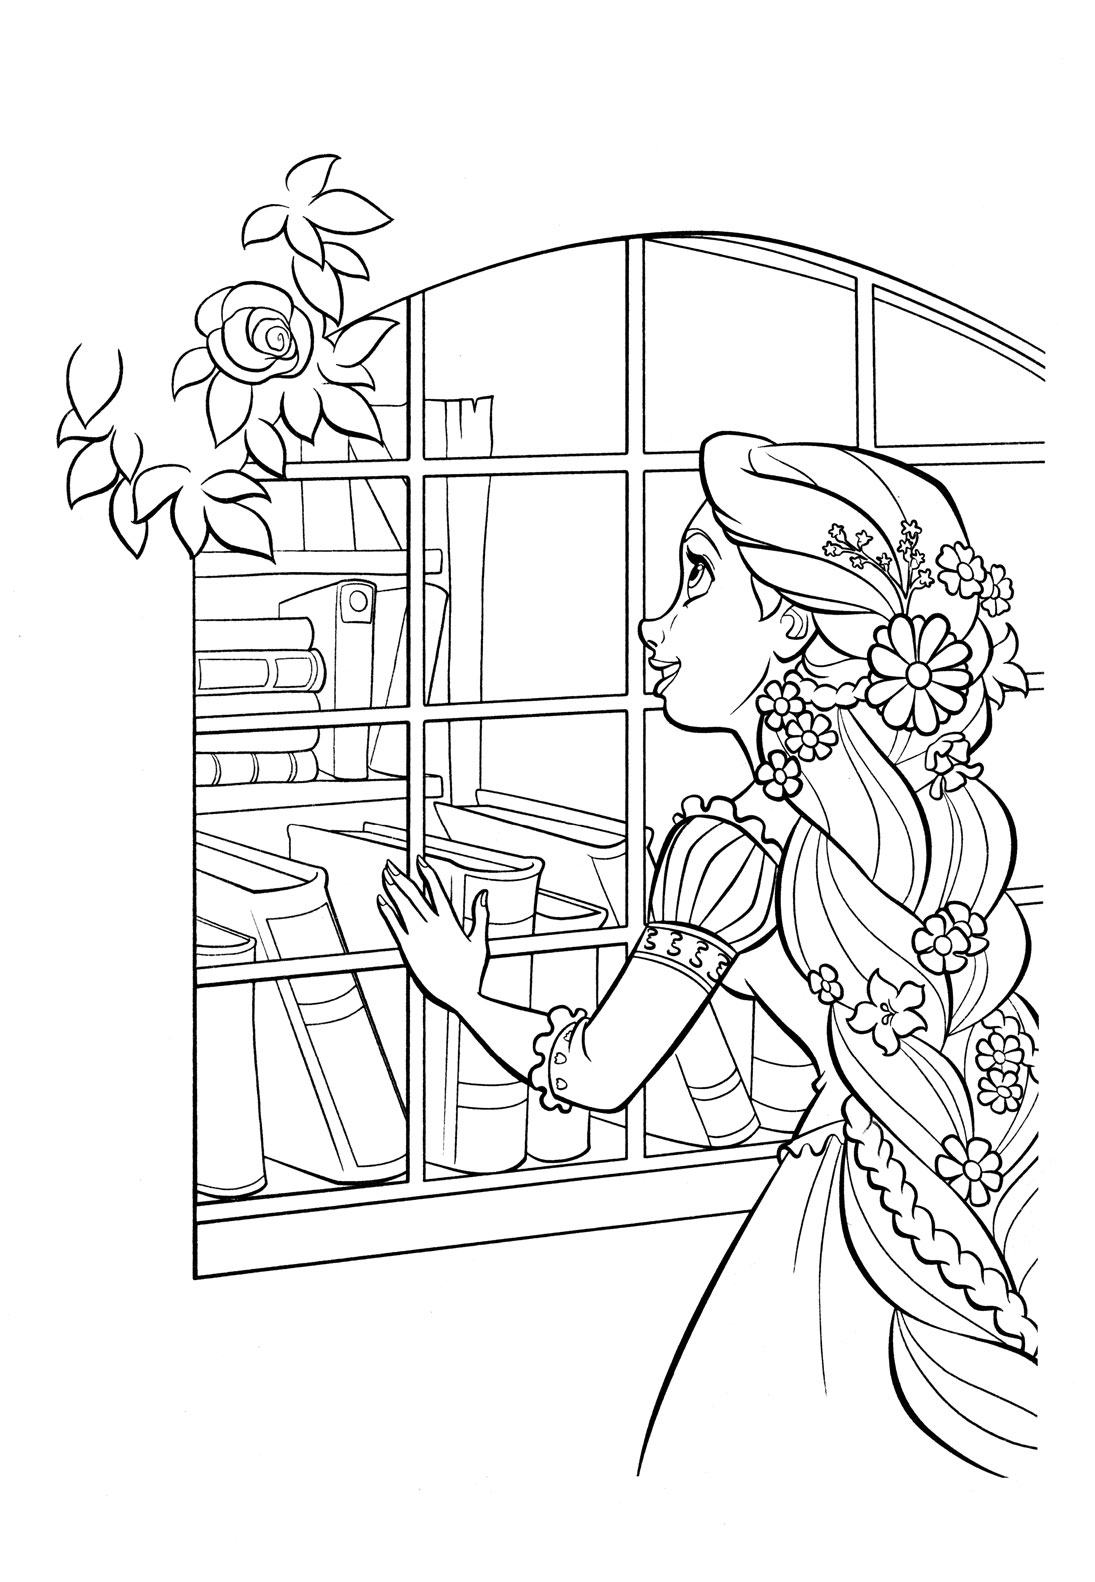 Rapunzel Coloring Pages Best Coloring Pages For Kids